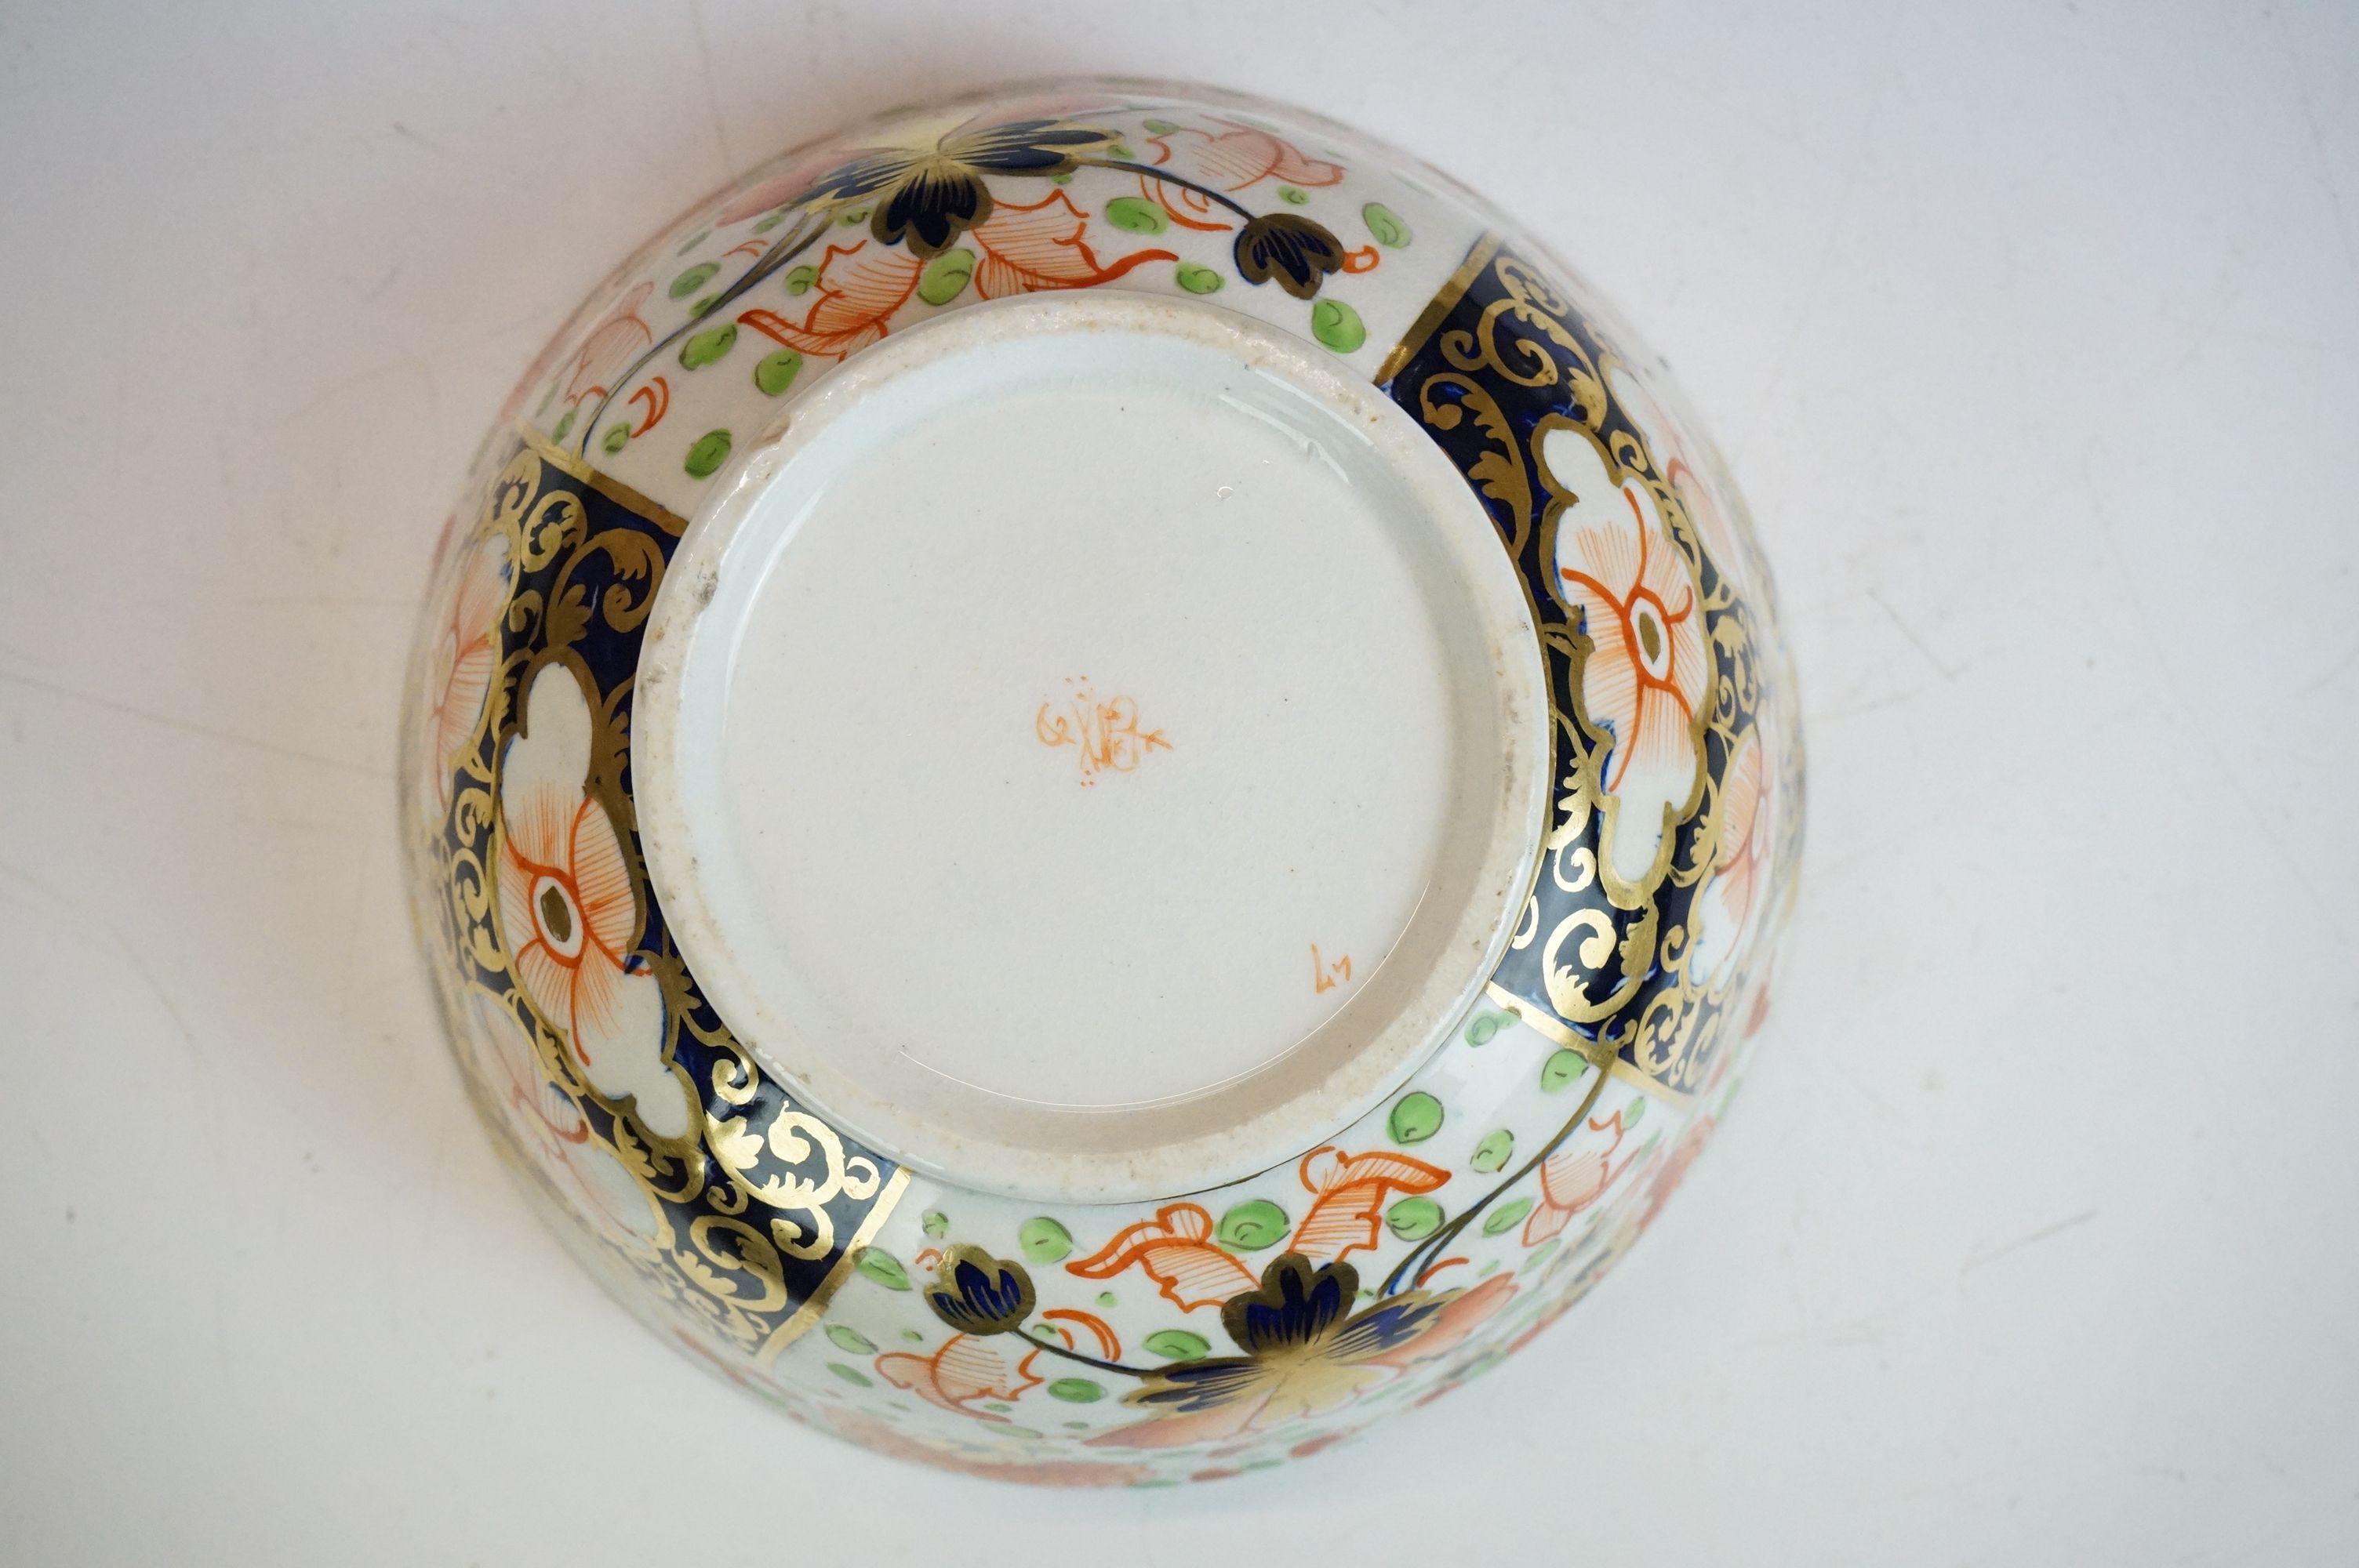 Early 19th century Crown Derby Imari pattern ceramics to include a small tureen & cover, teacups, - Image 13 of 24